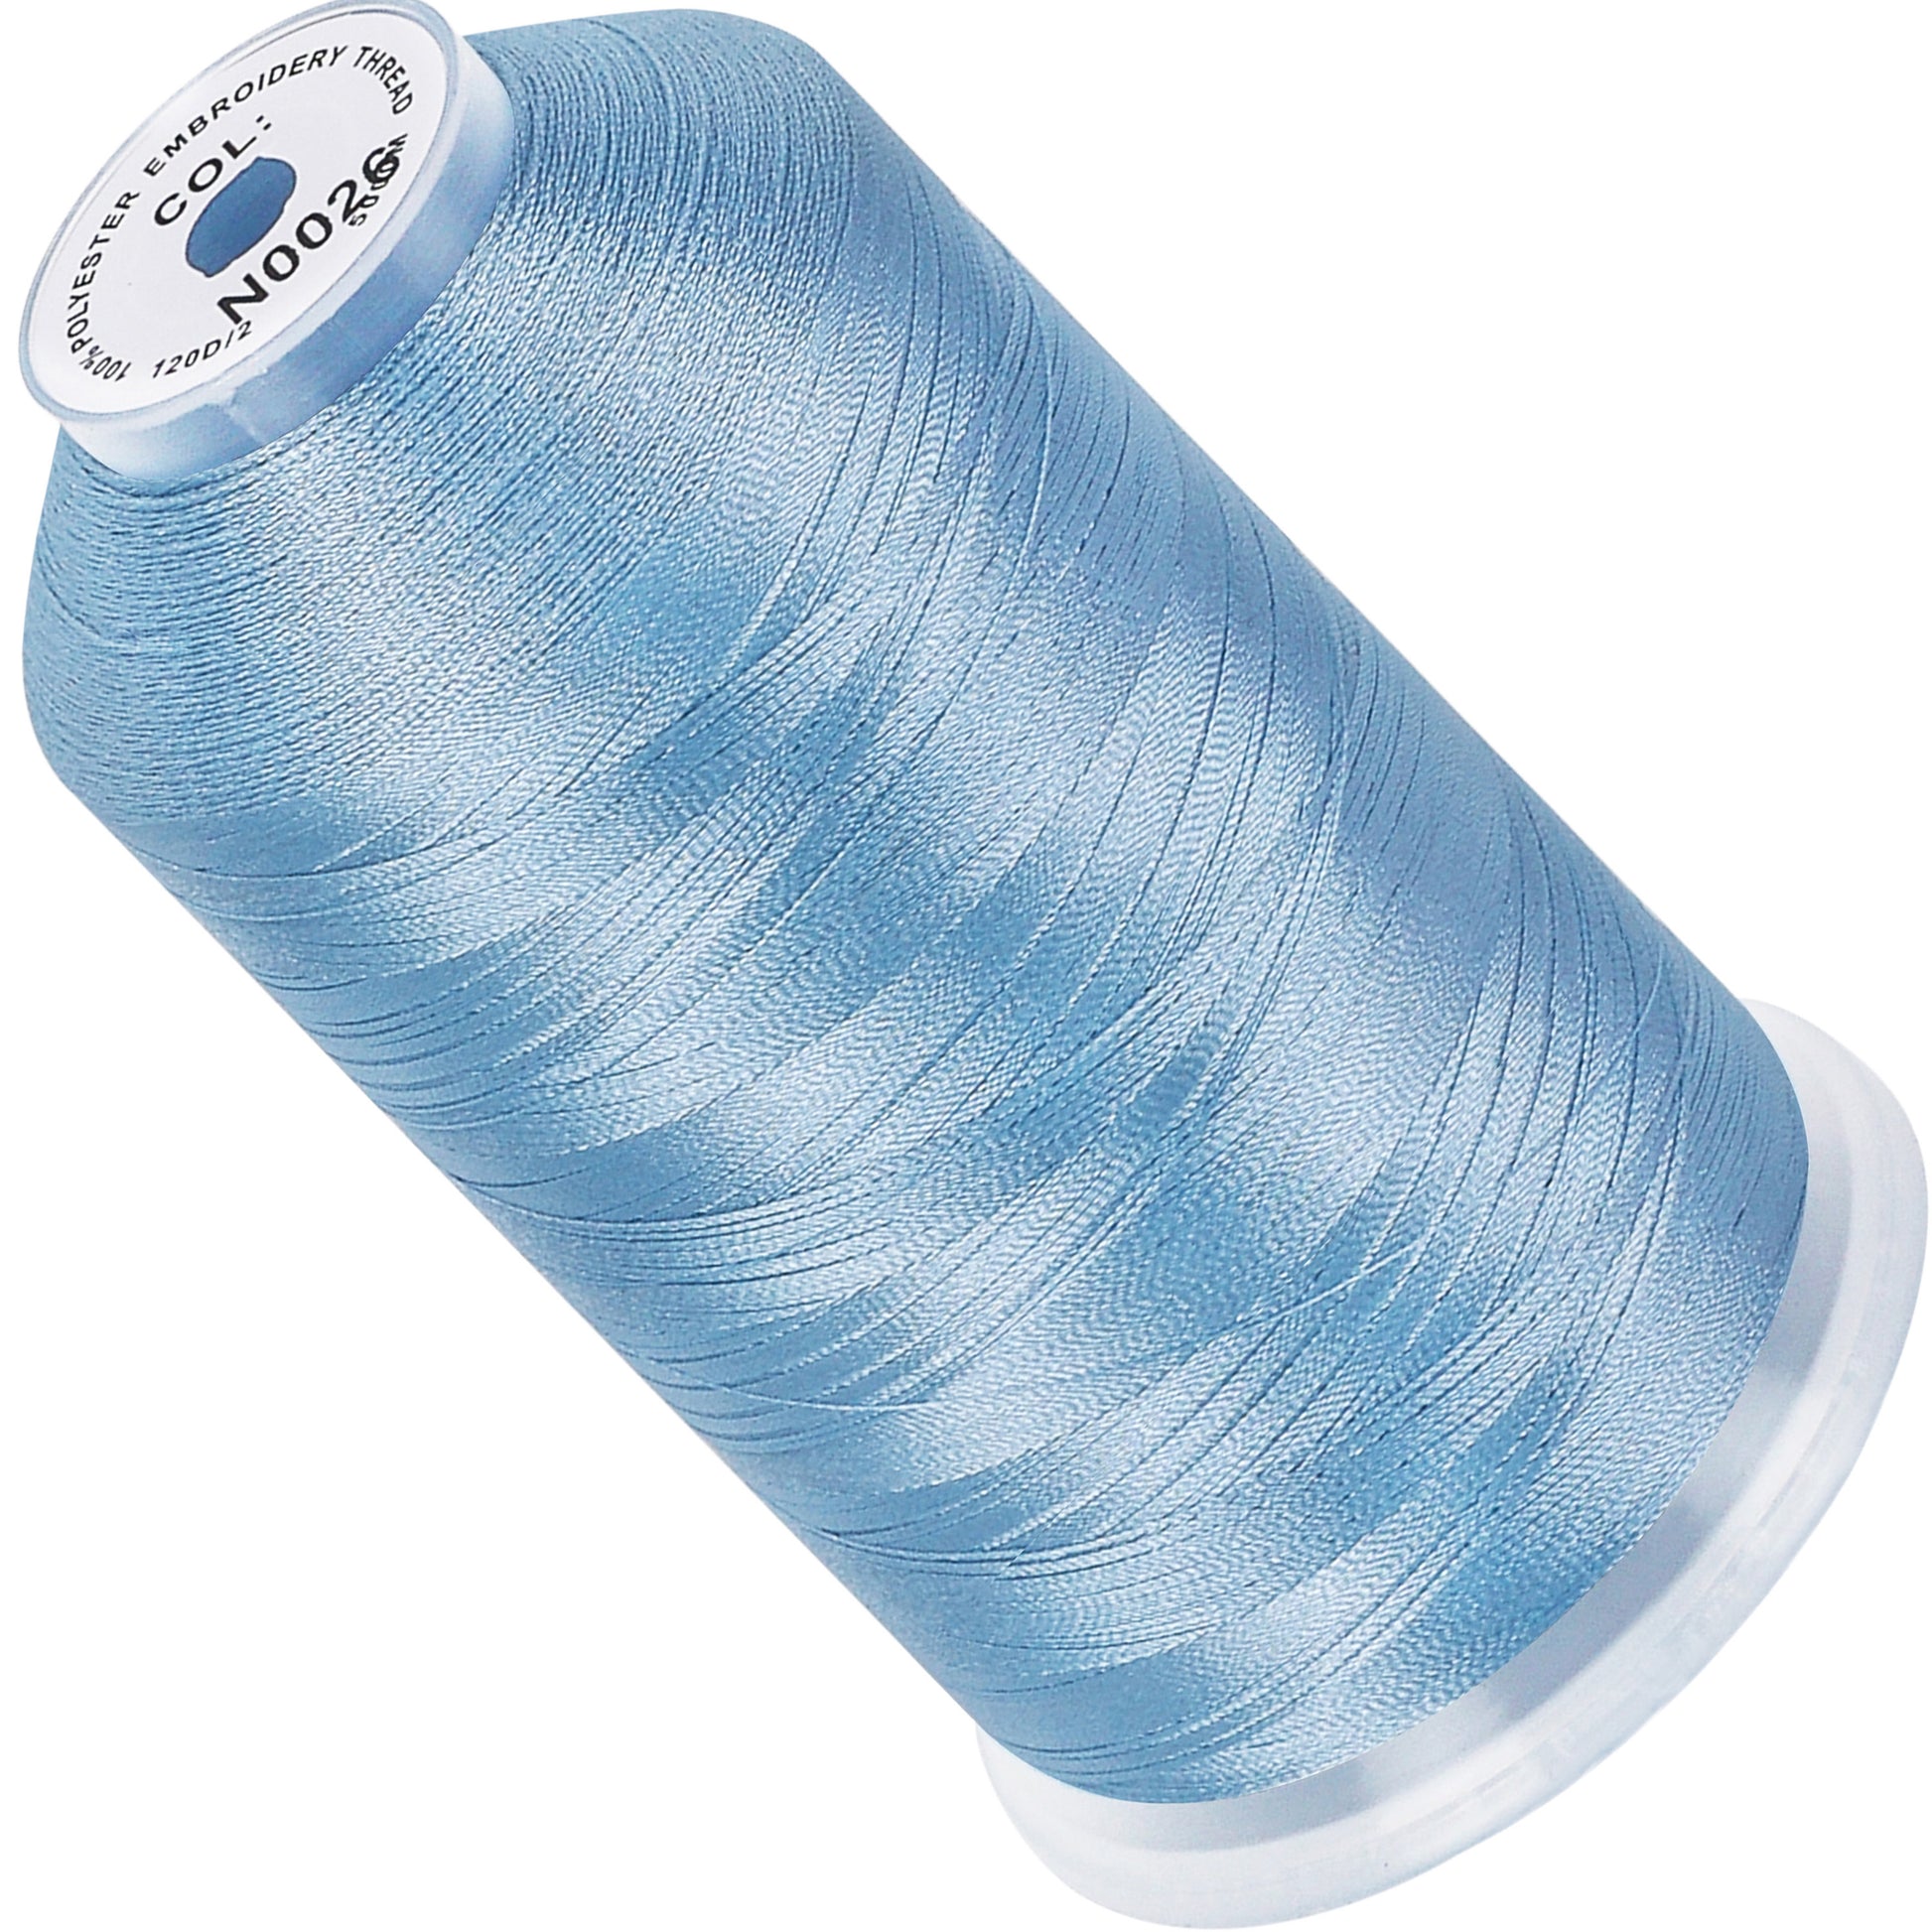 Exquisite Polyester Embroidery Thread - 405 Carolina Blue 1000M Spool